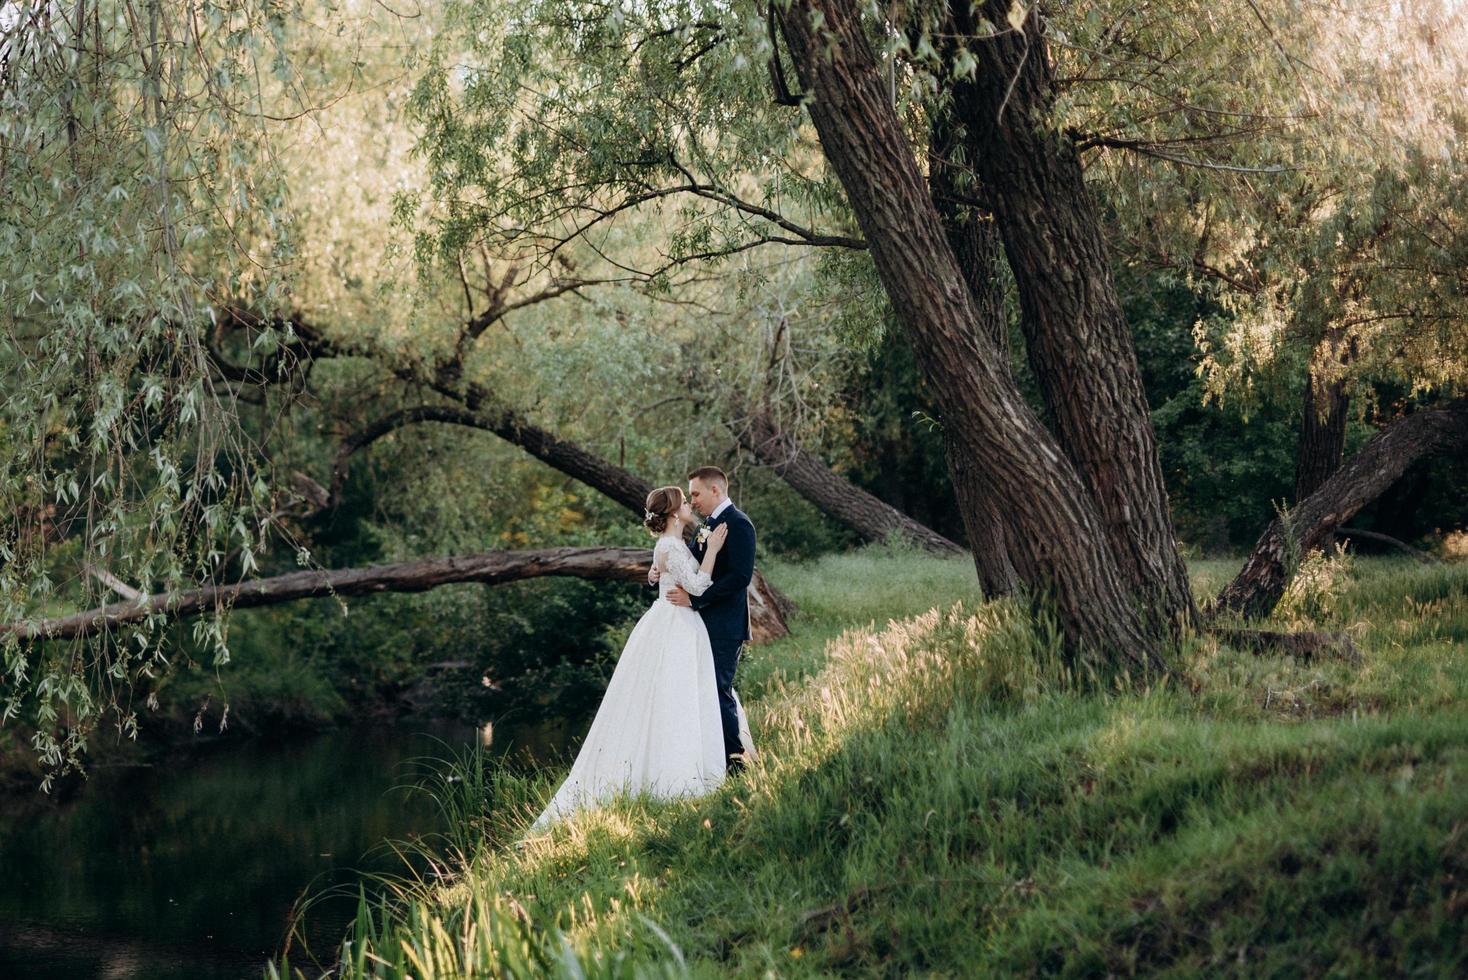 the groom and the bride are walking in the forest near a narrow river photo